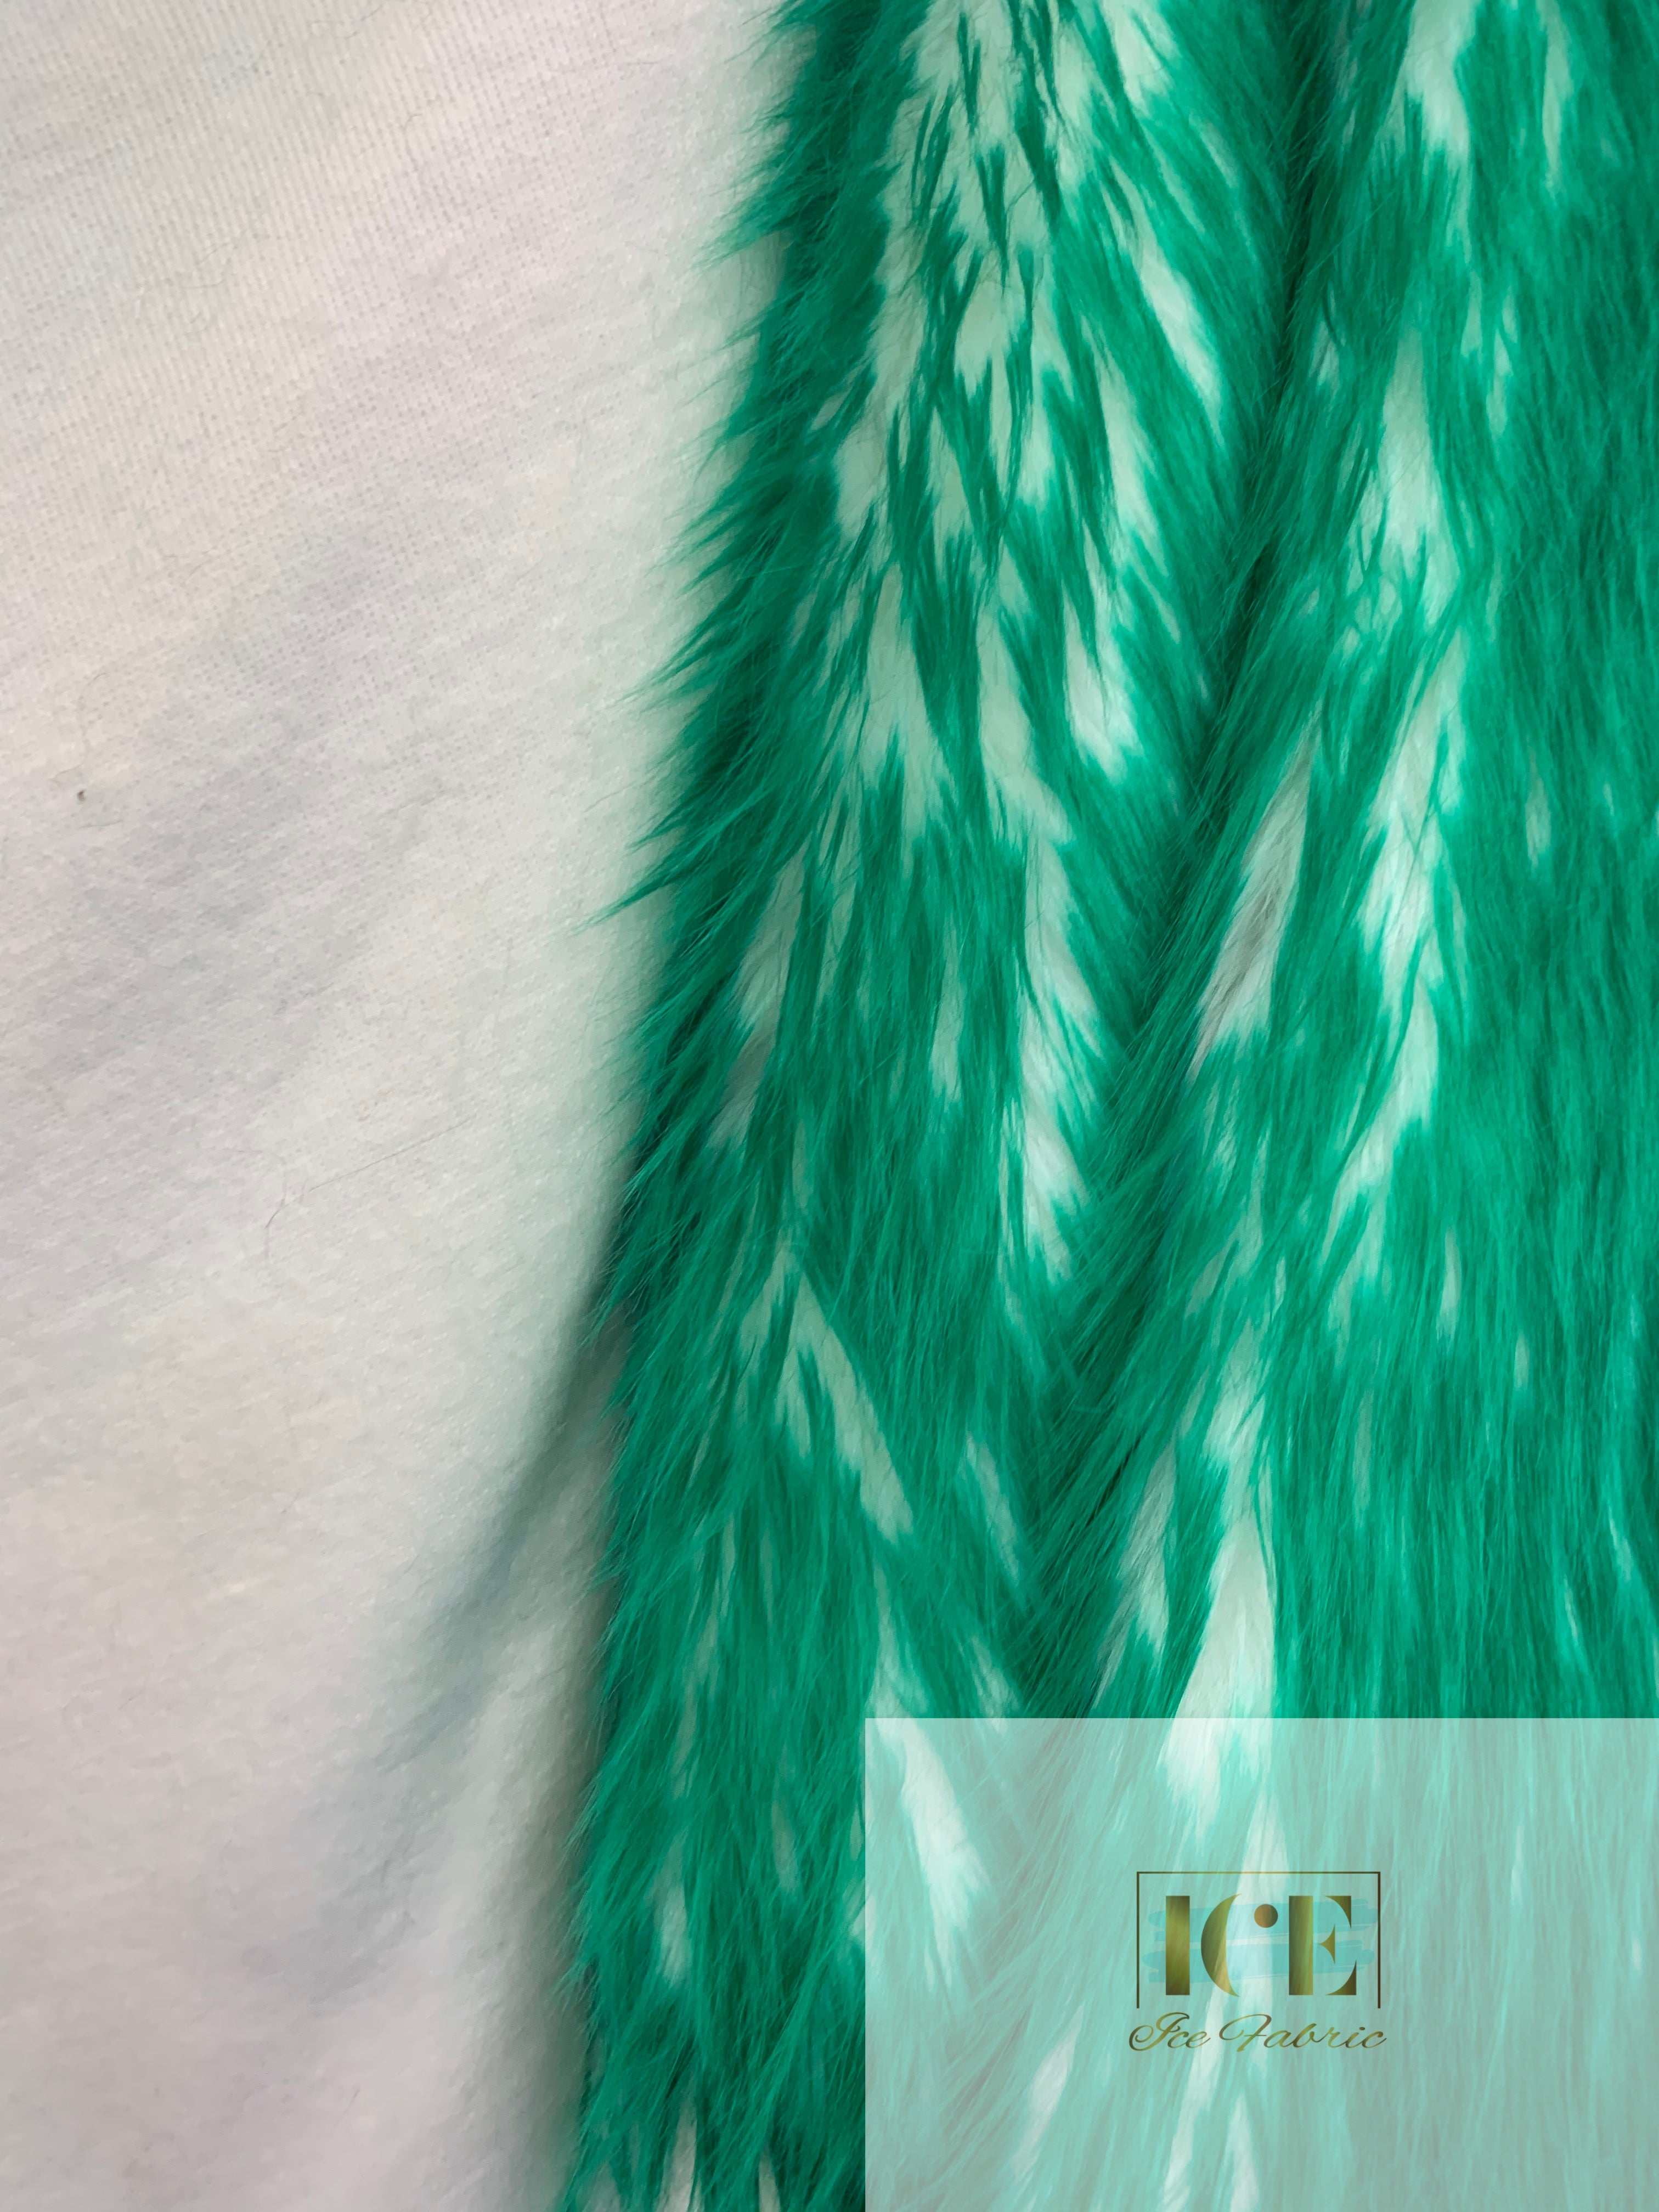 Canadian Fox 2 Tone Shaggy Long Pile Faux Fur Fabric For Blankets, Costumes, Bed SpreadICEFABRICICE FABRICSKelly GreenBy The Yard (60 inches Wide)Canadian Fox 2 Tone Shaggy Long Pile Faux Fur Fabric For Blankets, Costumes, Bed Spread ICEFABRIC Kelly Green